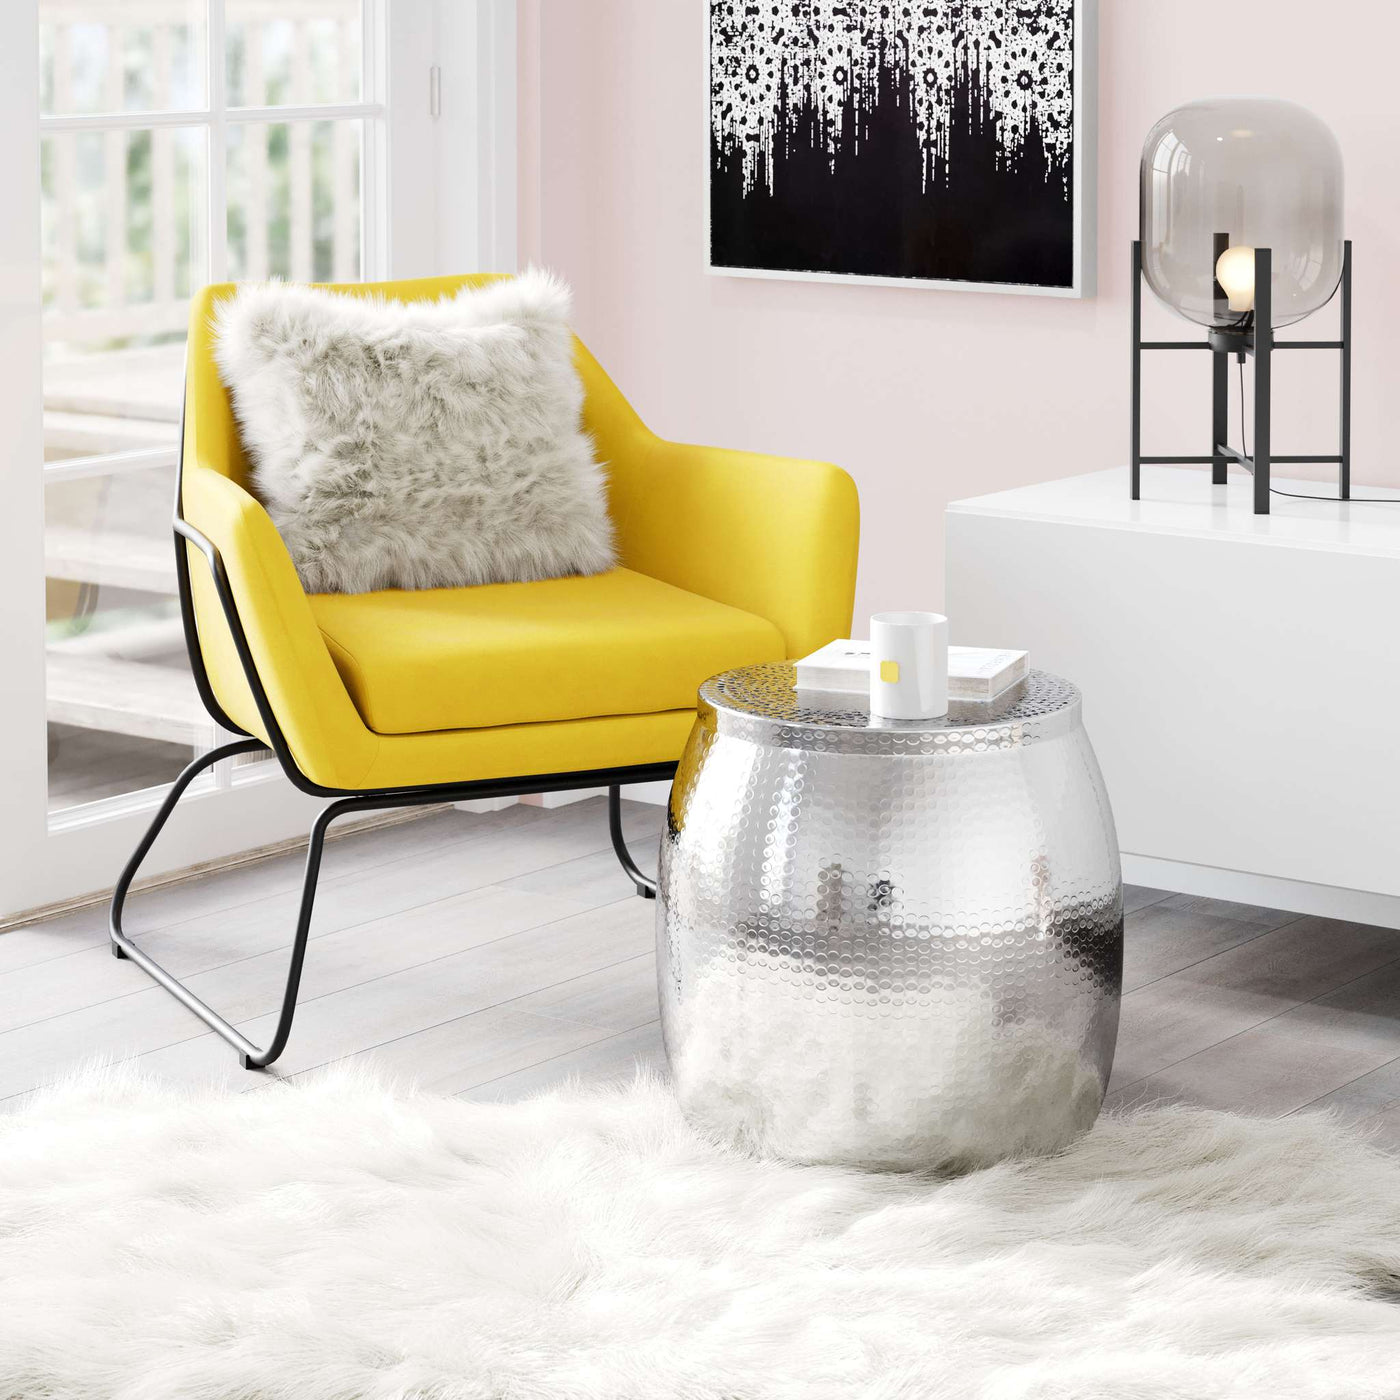 Zuo Mod Solo Side Table